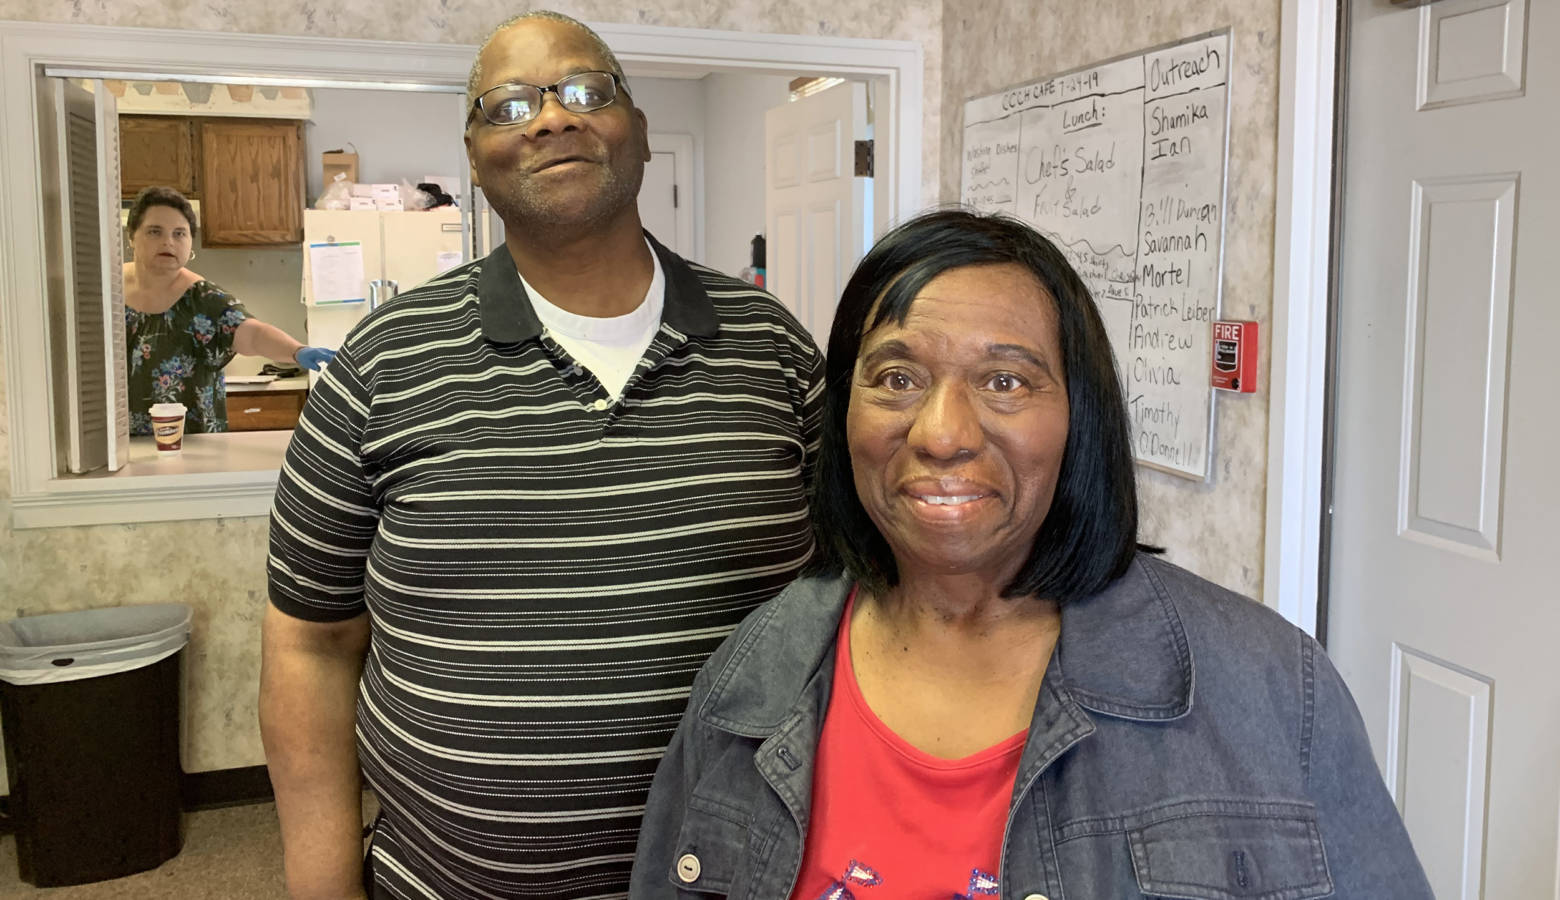 Clubhouse member David Fearance and his caregiver Kat Blane at Circle City Clubhouse. Fearance, a 59-year-old Army veteran has been coming to this converted office building on Indy's west side for nearly three years. (Jill Sheridan/IPB News)